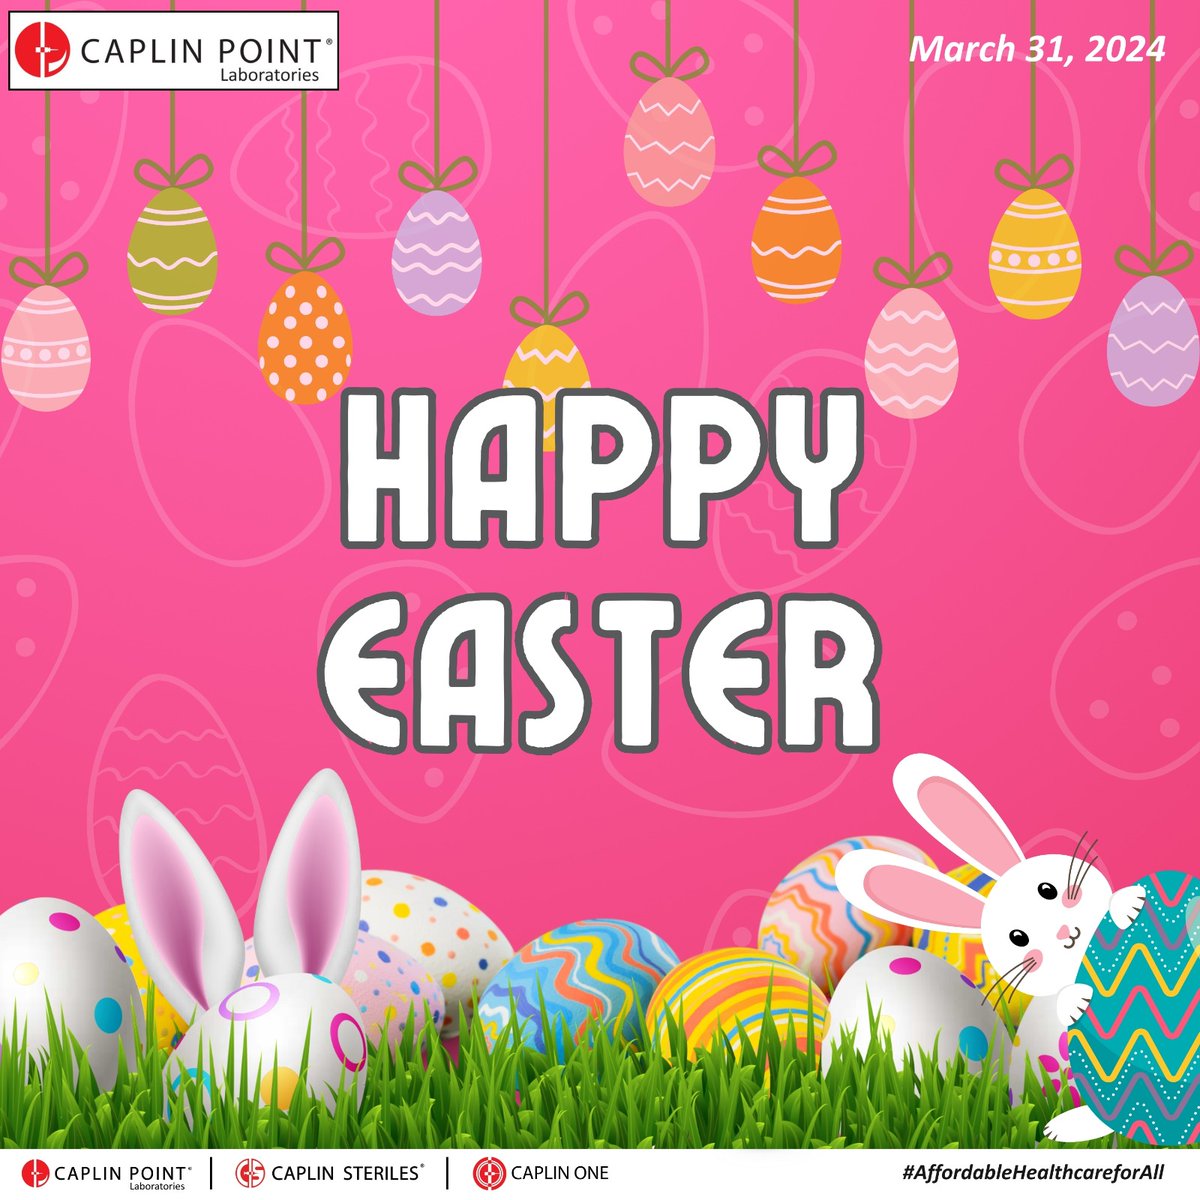 Easter wishes from all of us at Caplin Point. May this time of renewal bring blessings to you and your family.

#caplinpointlaboratories #caplinpoint #caplinsteriles #caplinonelabs #caplinone #sterilemanufacturing #pharmamanufacturing #injectables #formulations #RandD